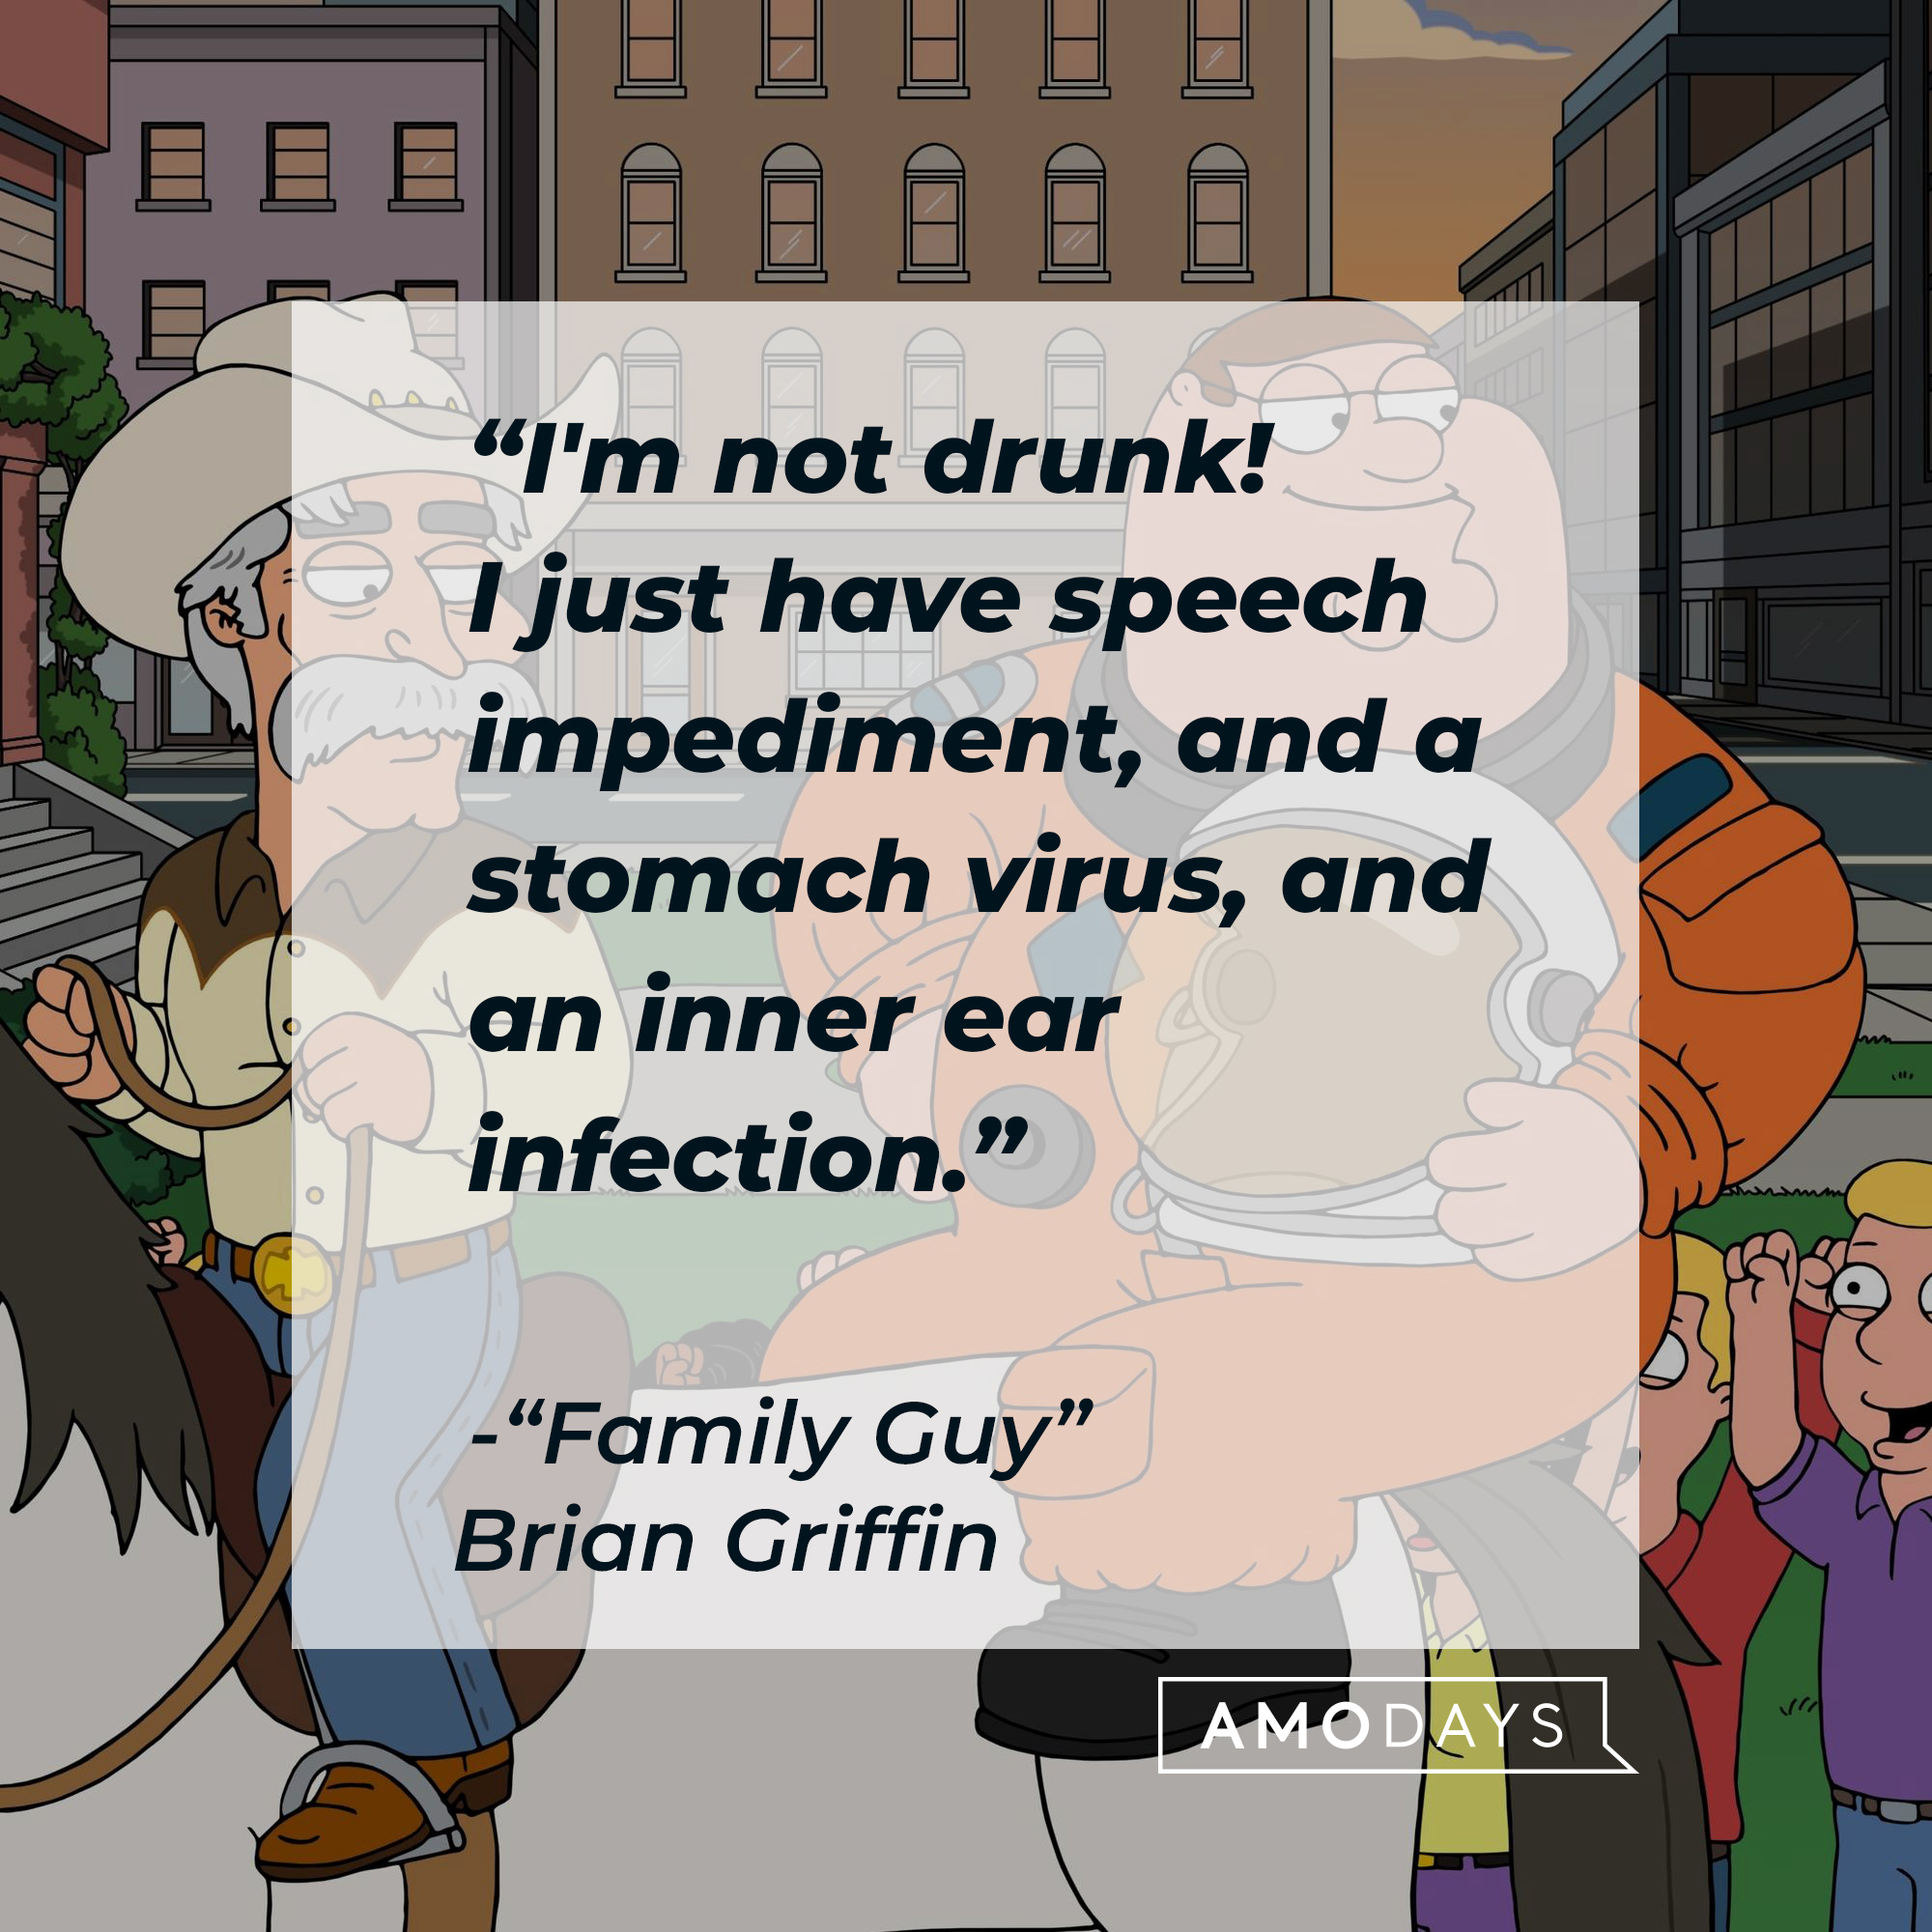 Peter Griffin with Brian Griffin's quote: "I'm not drunk! I just have speech impediment, and a stomach virus, and an inner ear infection." | Source: Facebook.com/FamilyGuy